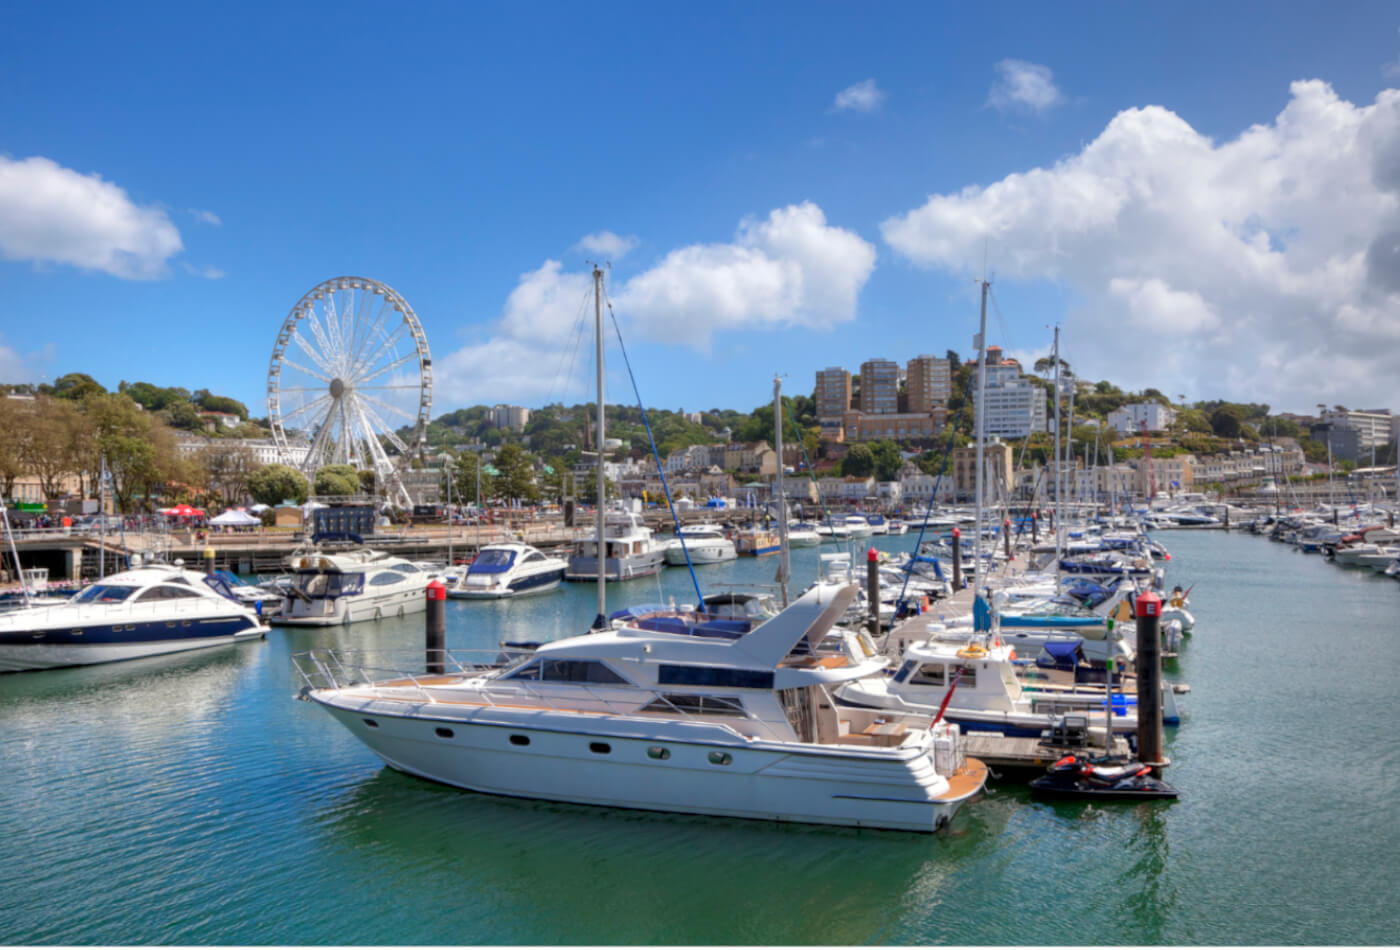 View of Torquay from the harbour with boats in the foreground and the English Riviera Wheel in the background.